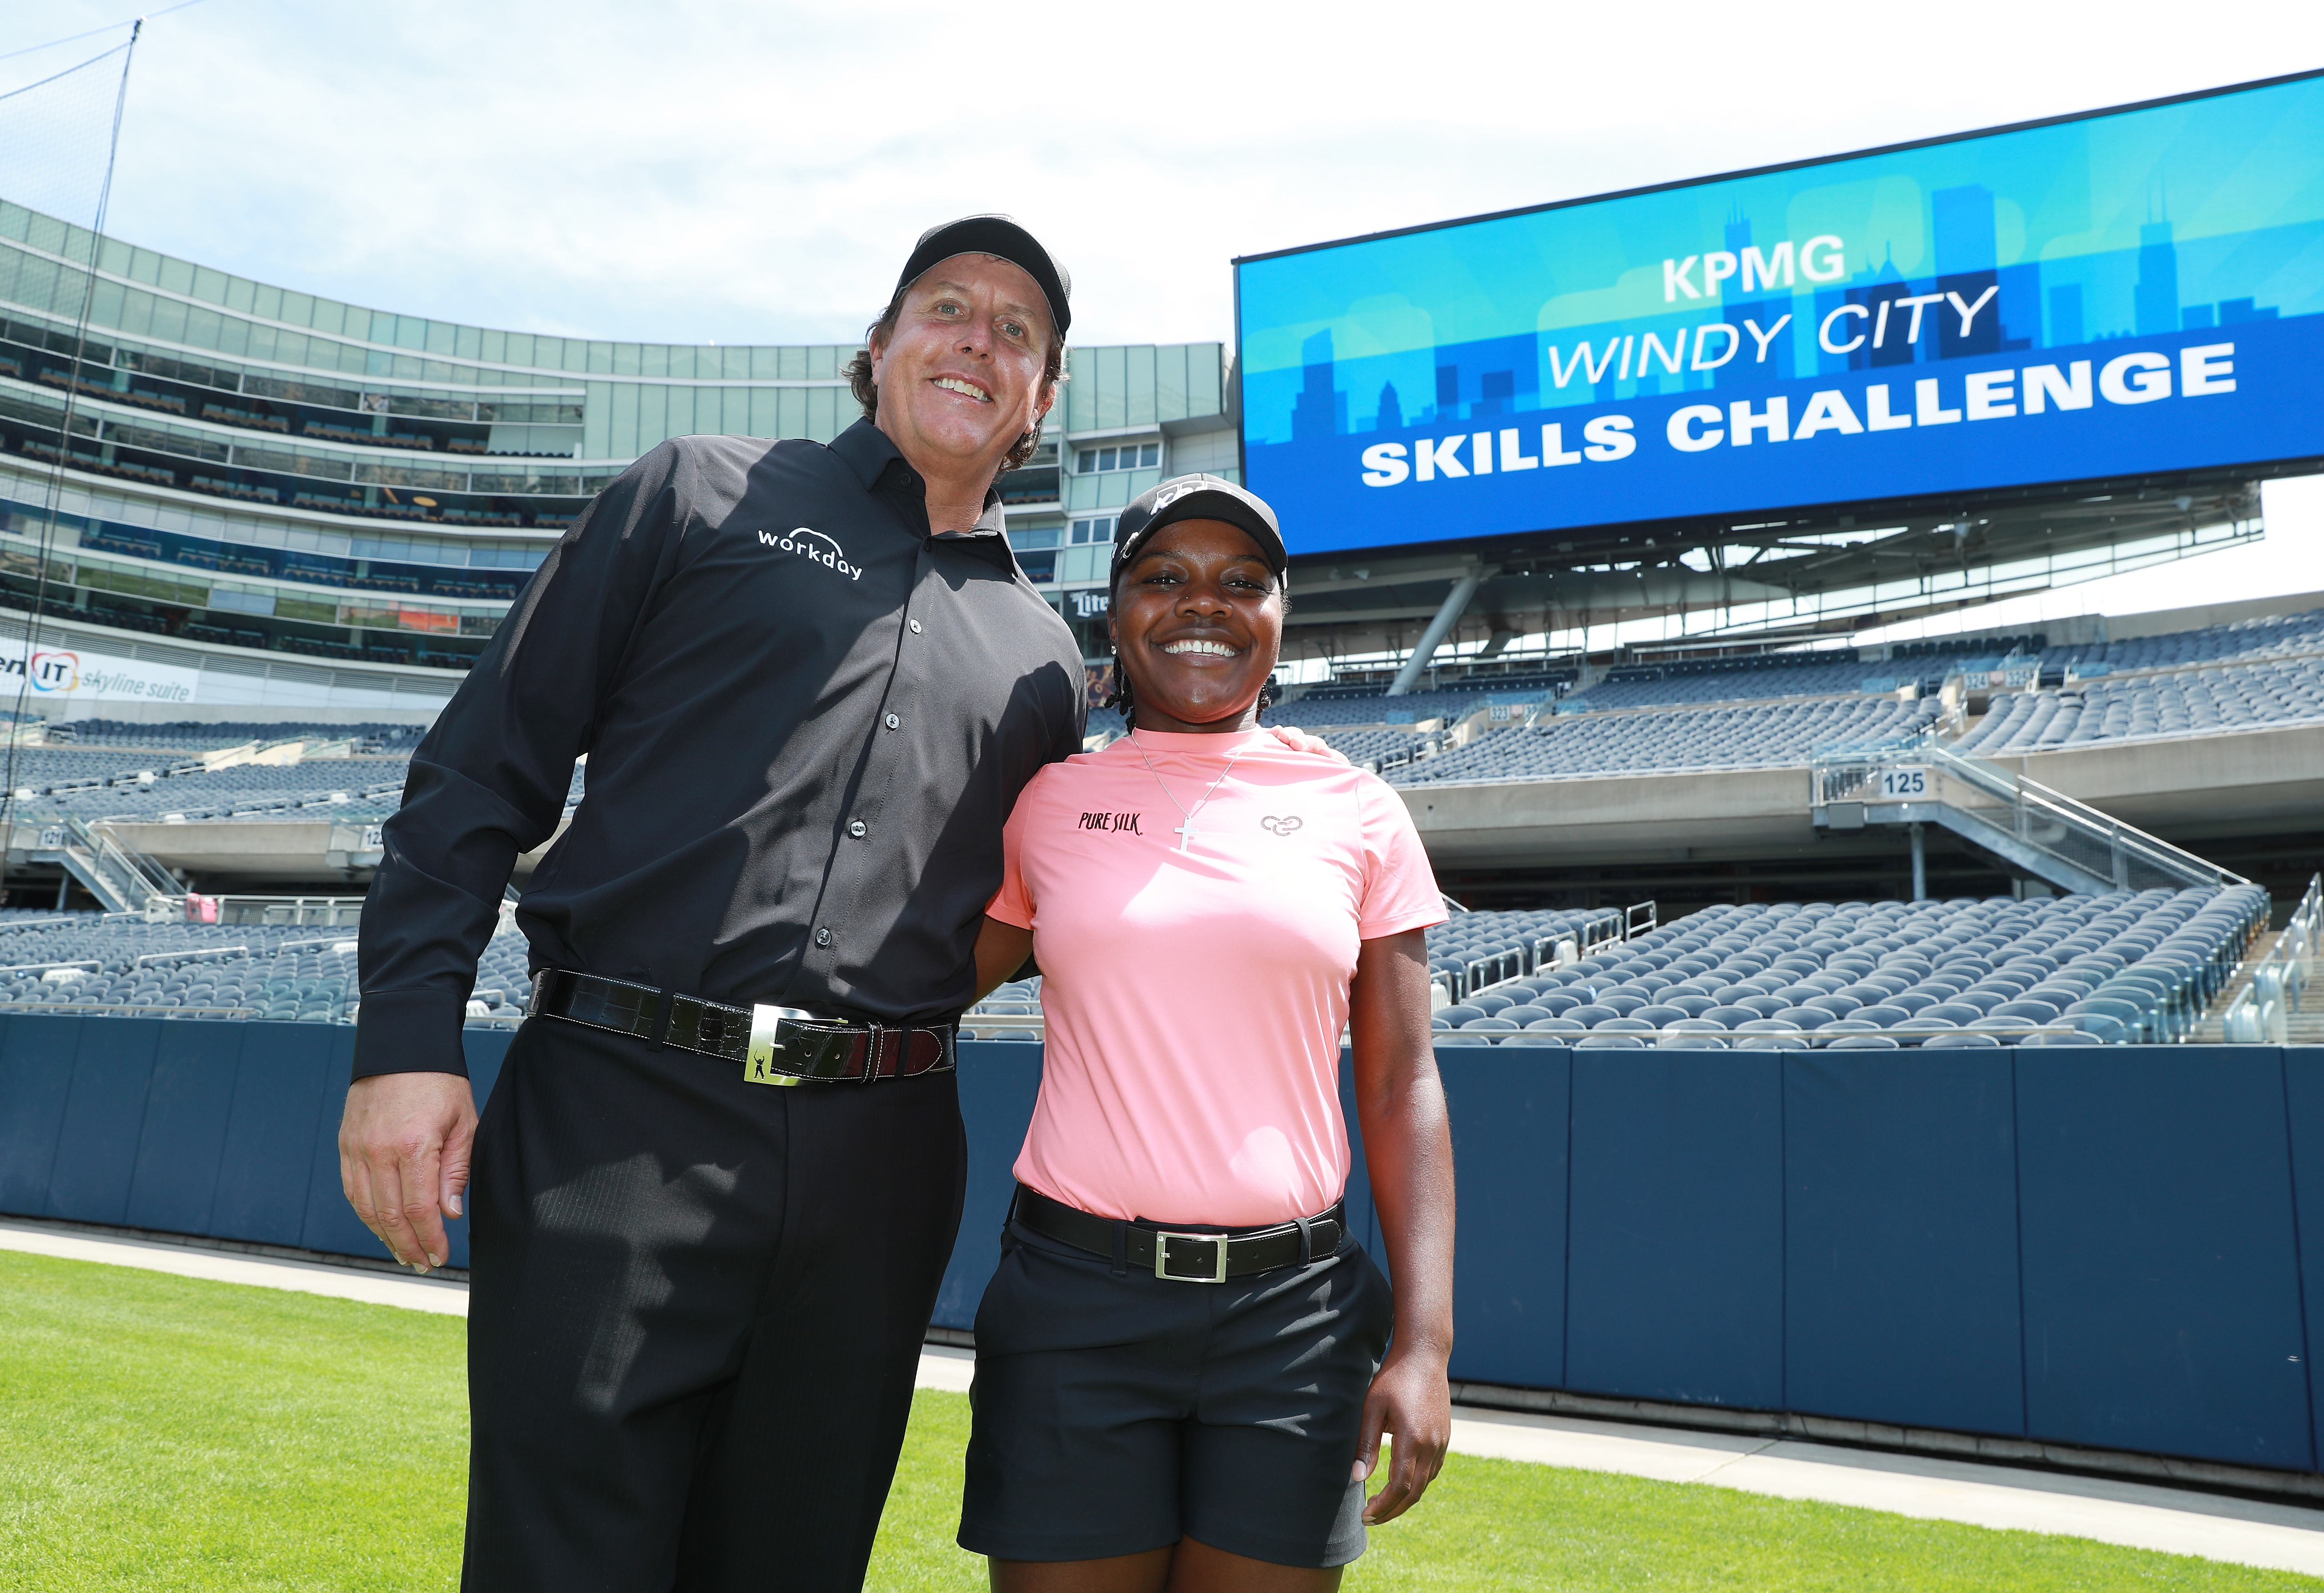 Phil Mickelson and Mariah Stackhouse